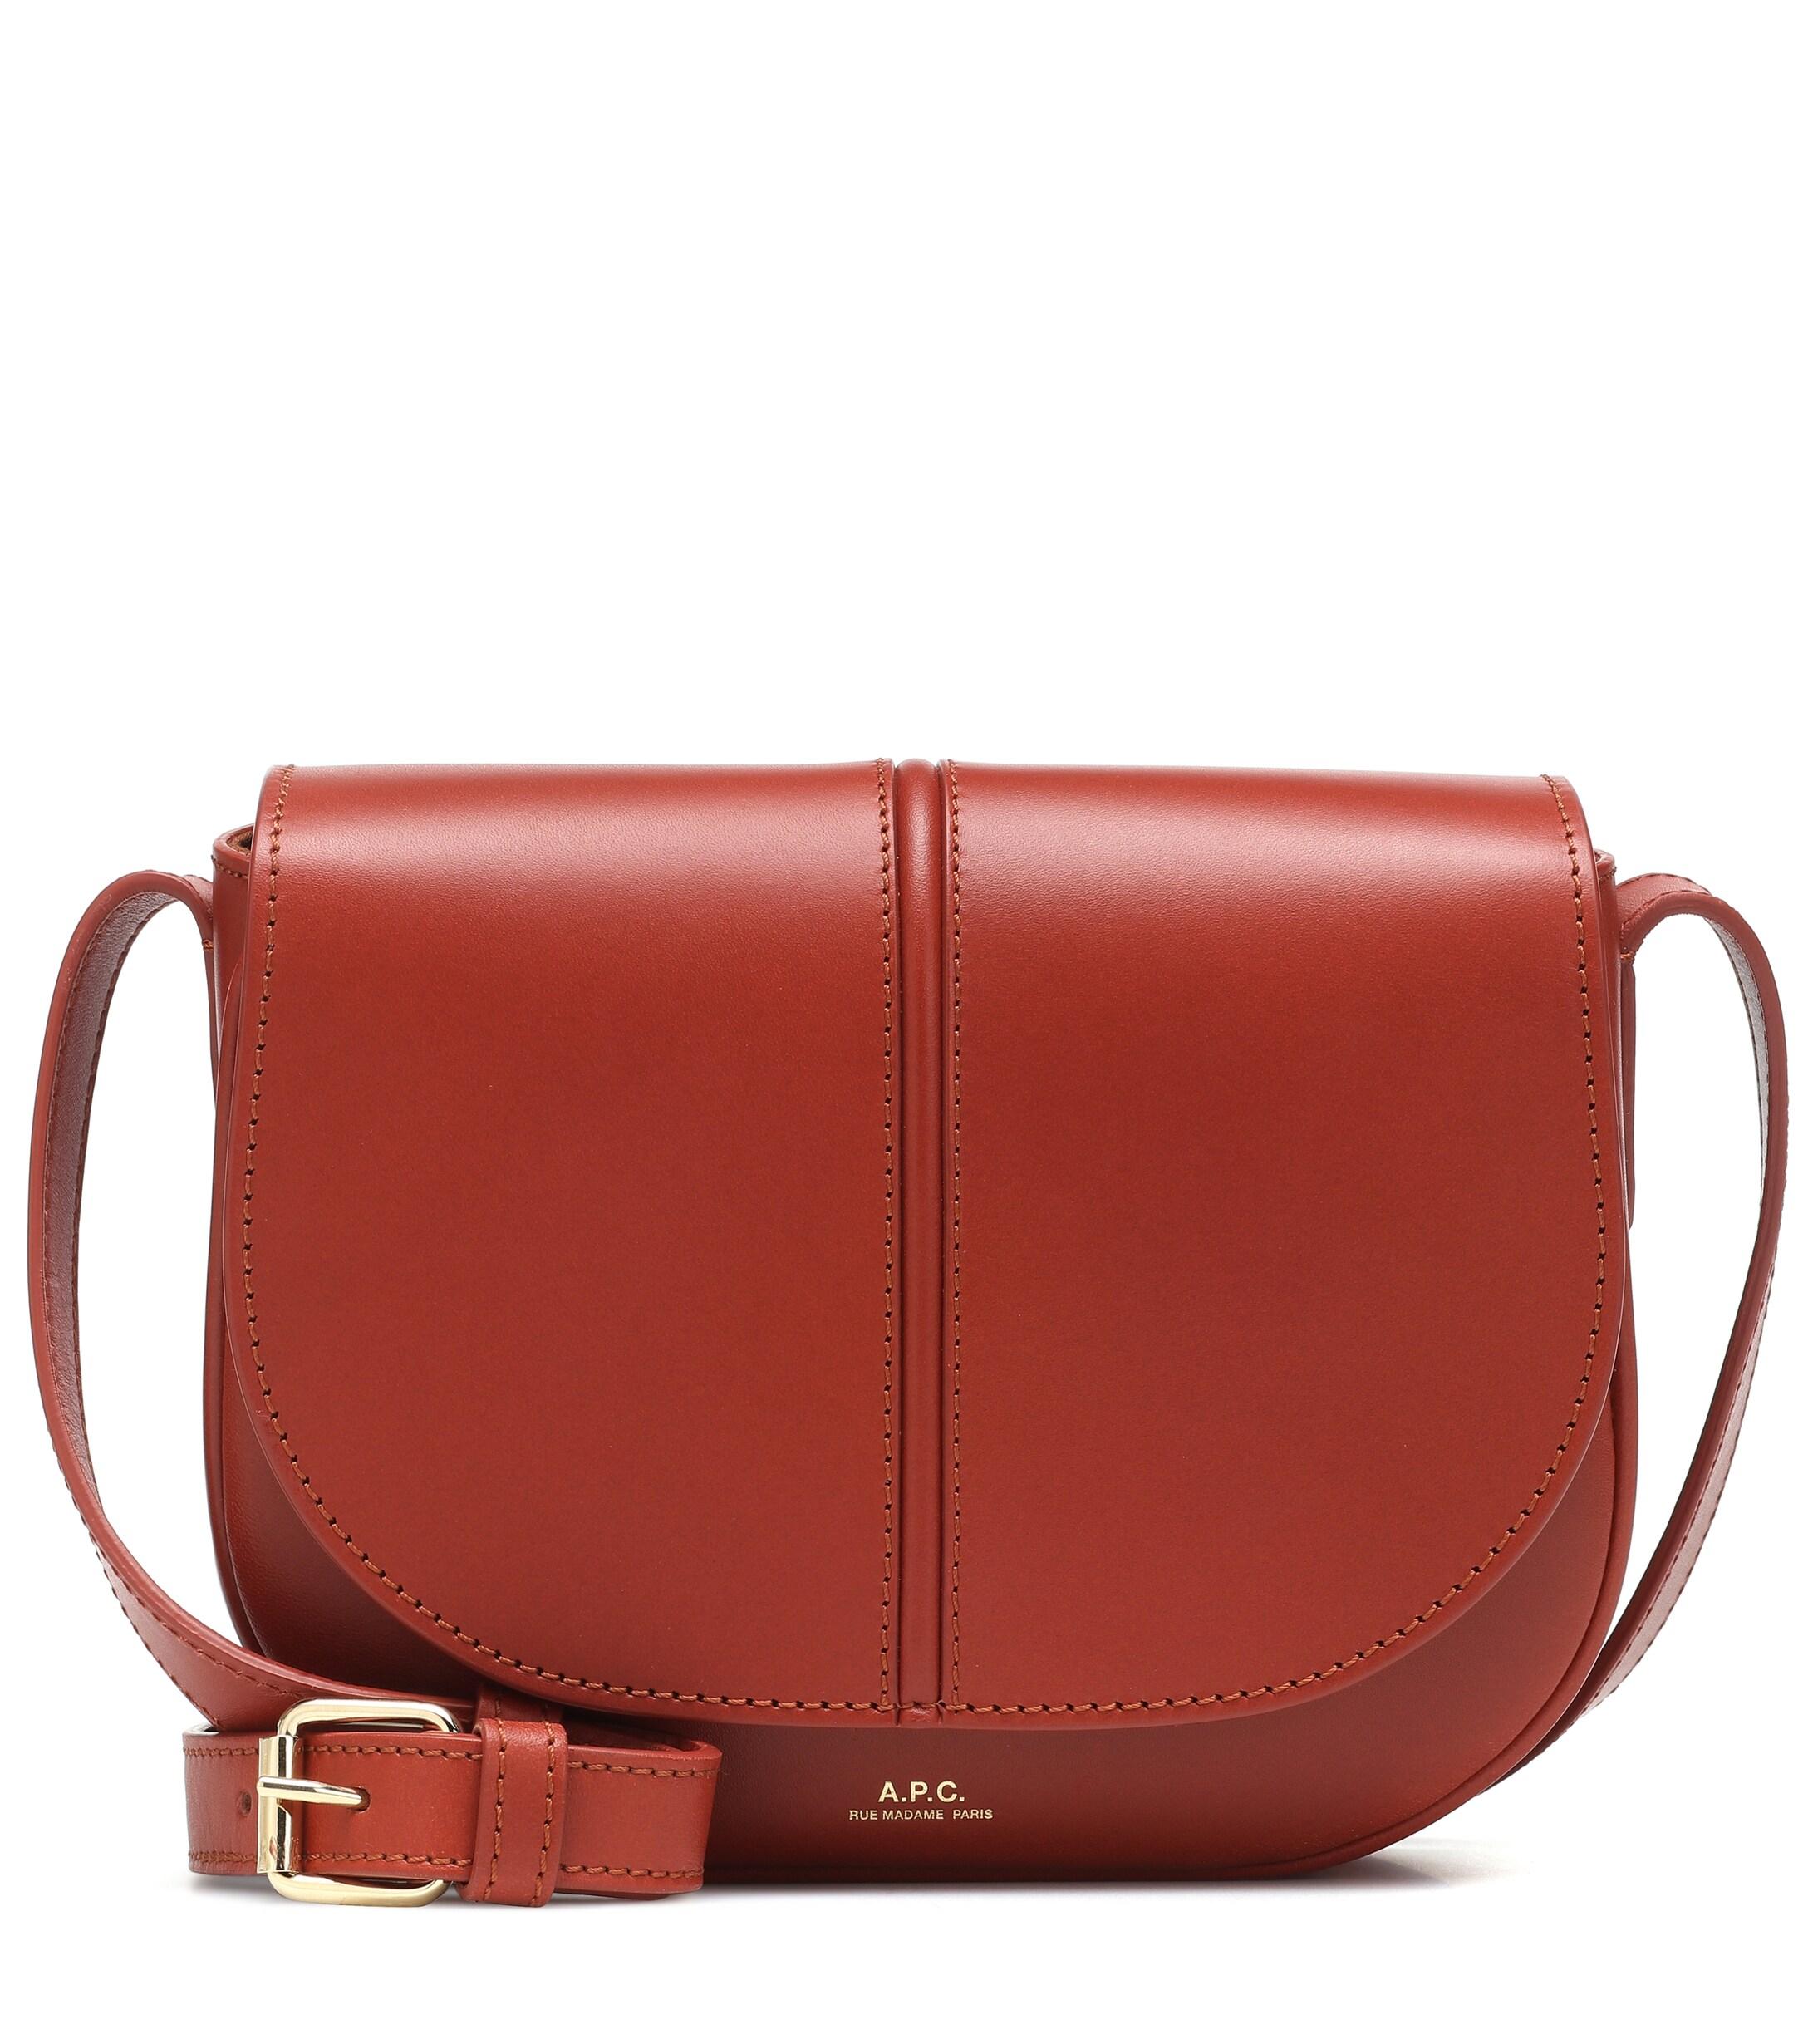 A.P.C. Betty Leather Crossbody Bag in Red - Lyst